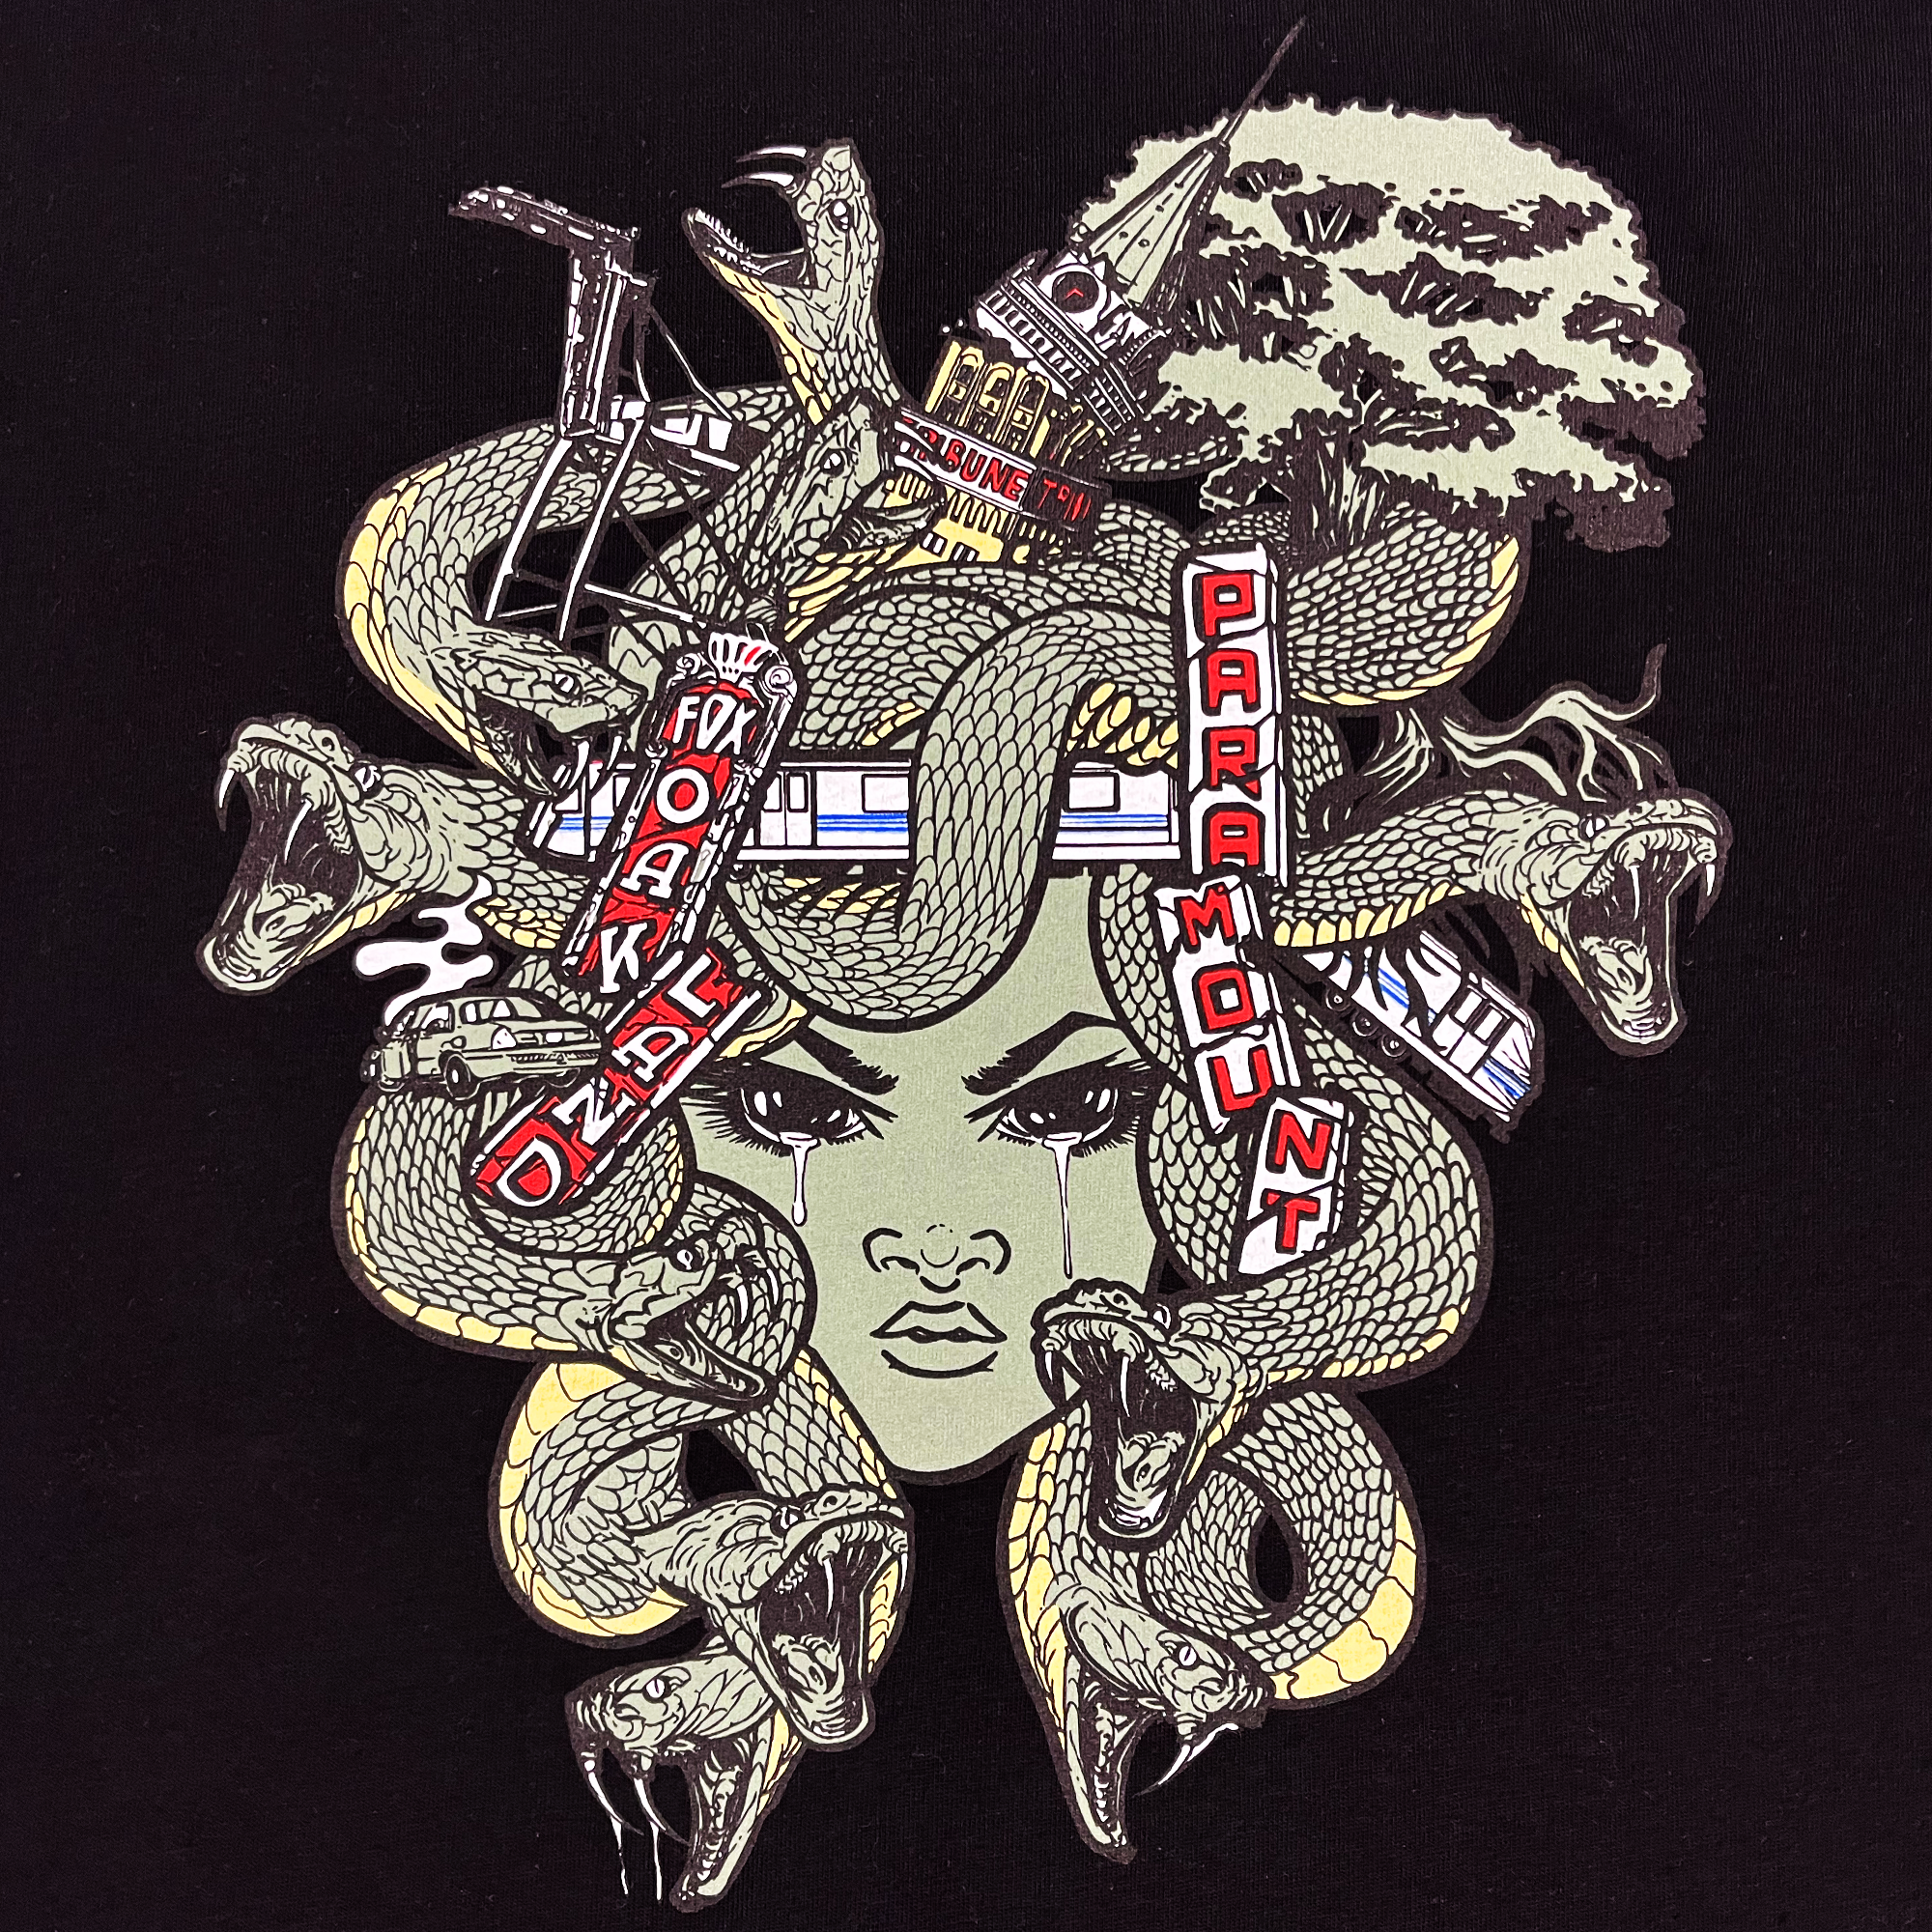 Detailed close-up of Medusa monster of the mind graphic on the front chest of a black-shirt.